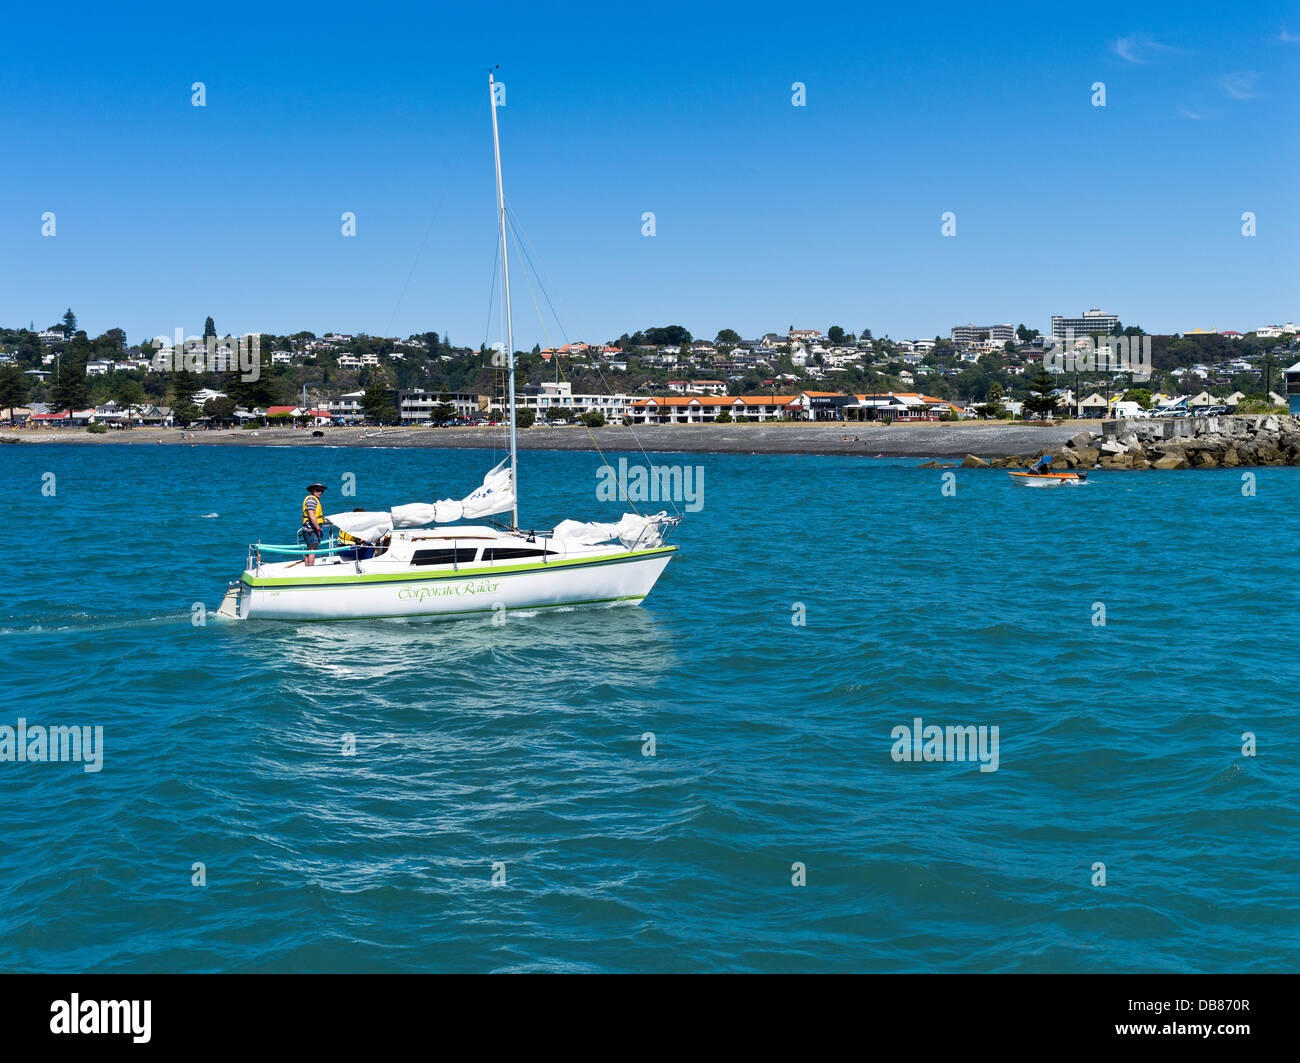 dh Hawkes bay NAPIER NEW ZEALAND Man yacht entering Napier inner harbour boats sailboat sailing leisure Stock Photo